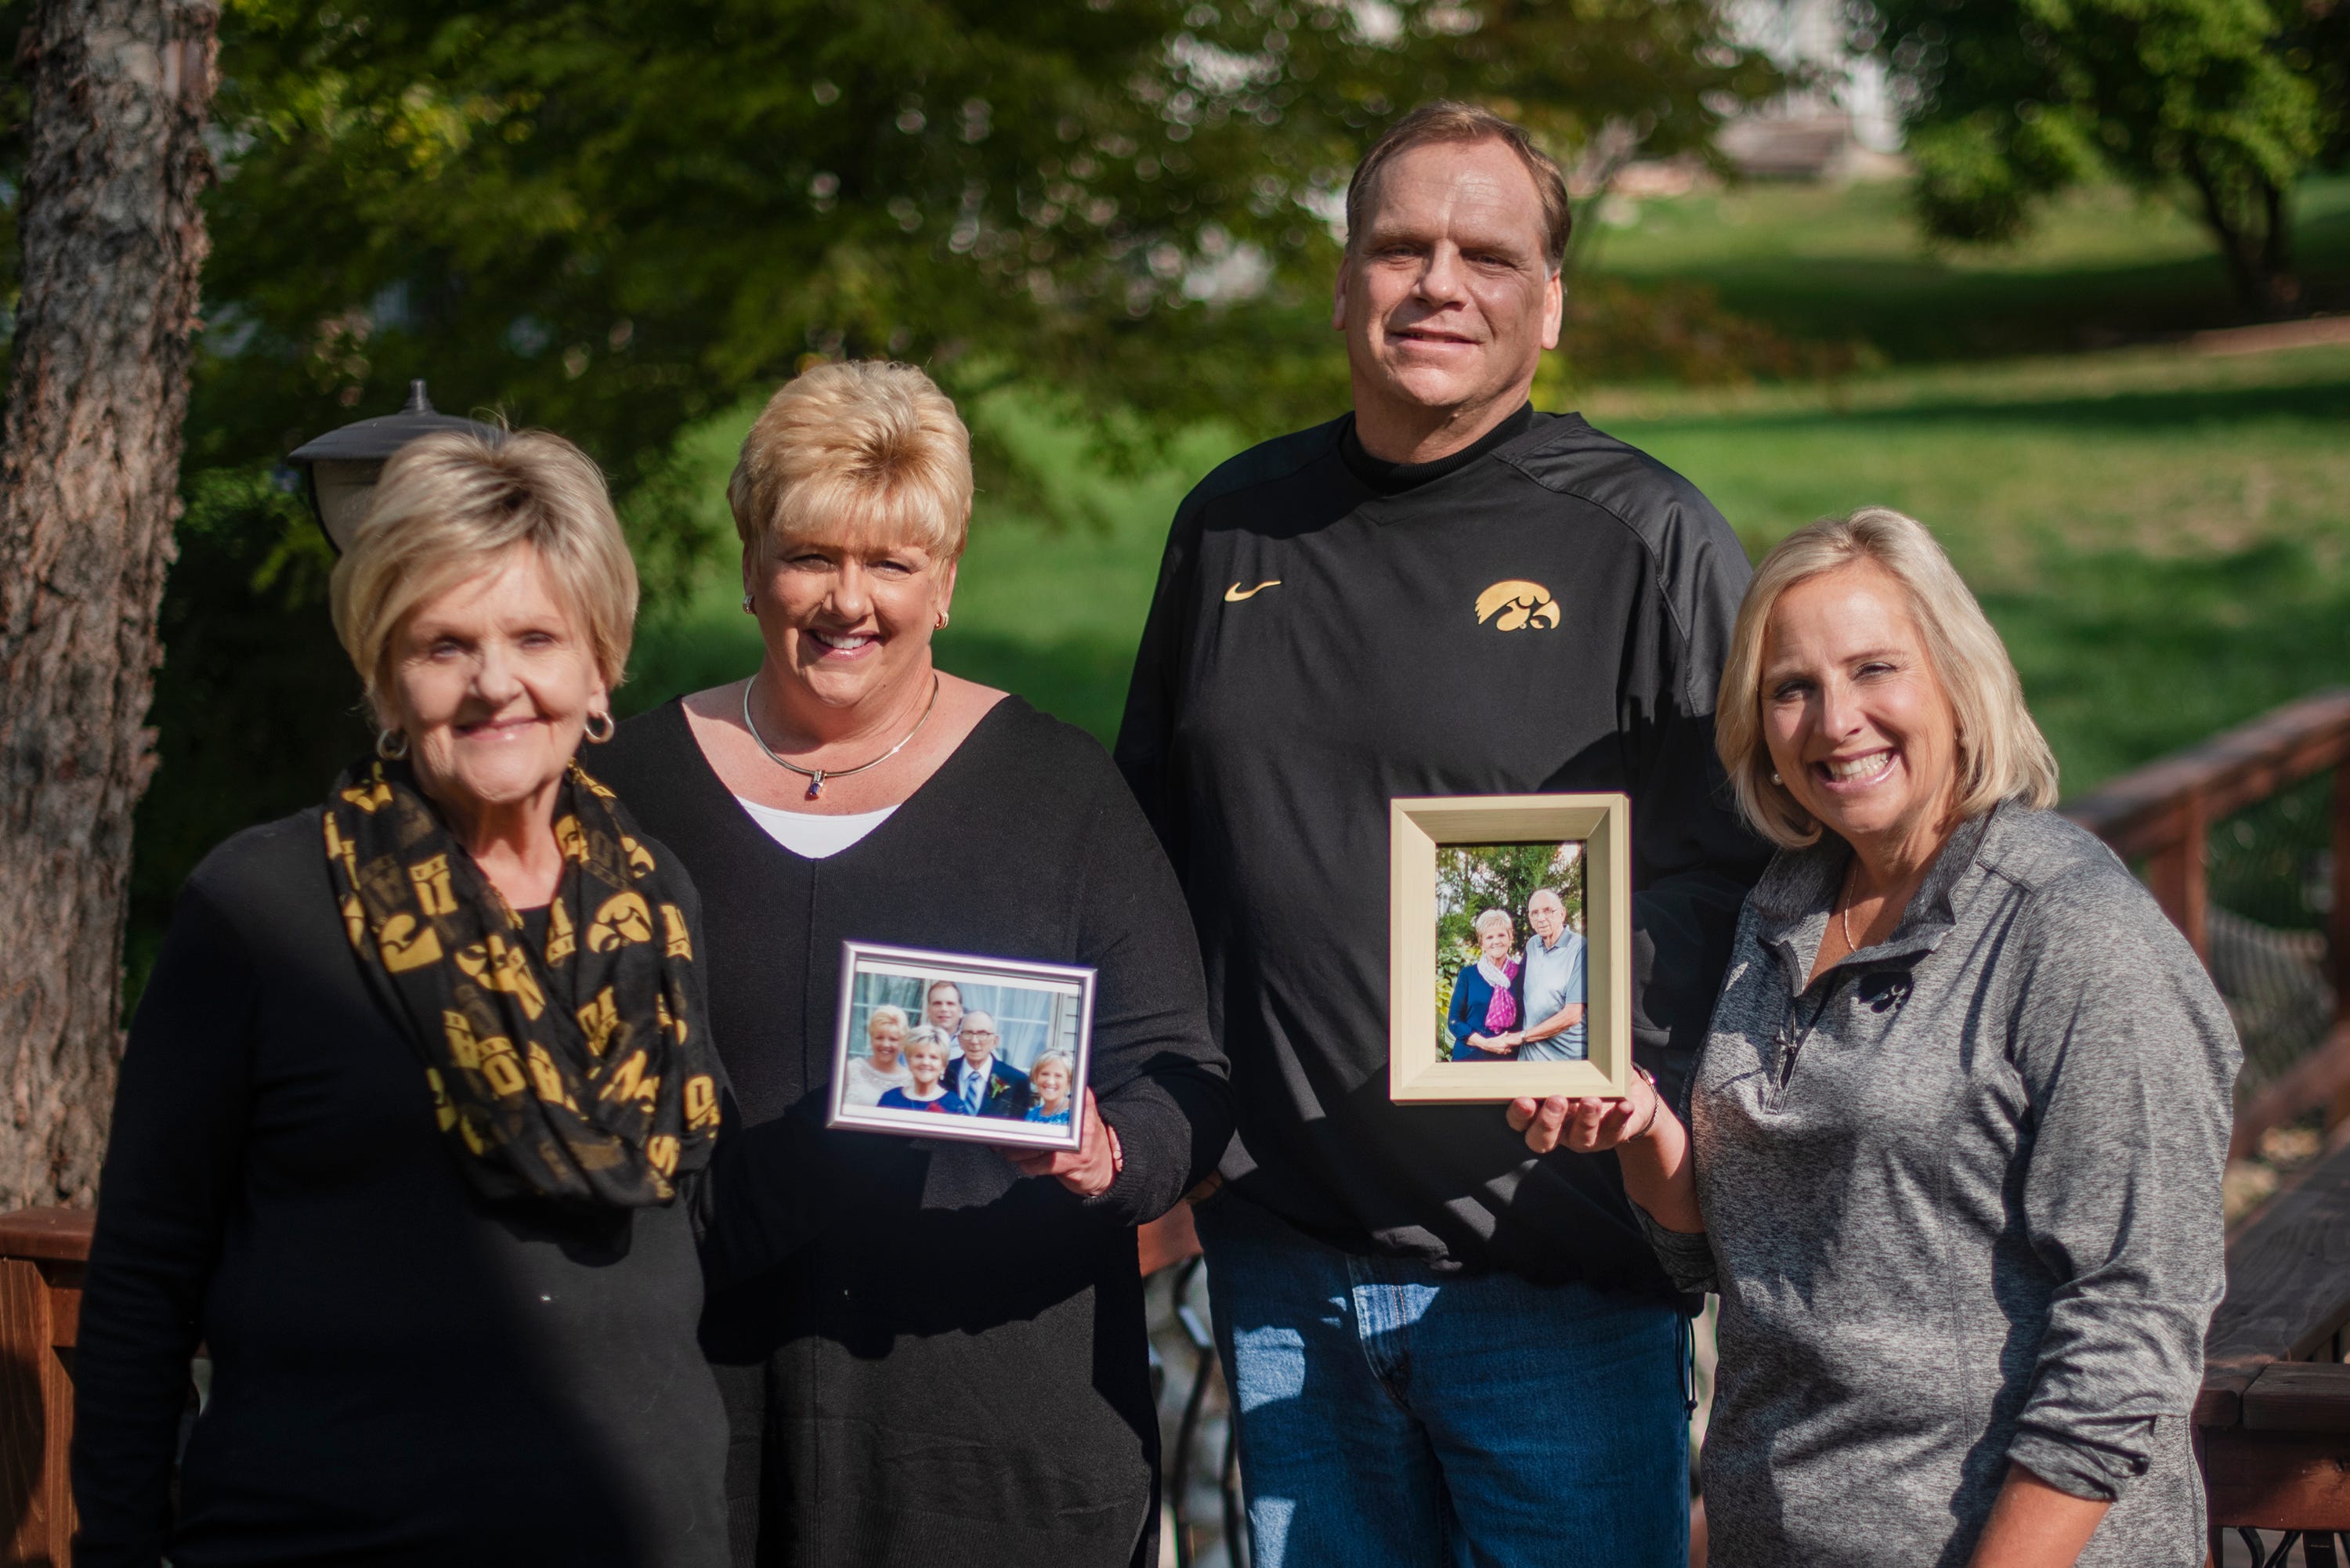 Daryle Jass, 84, died of COVID-19 on April 20 in Ankeny. Carol Jass (left), Brenda Hemsted, Tammy Zook, and Brian Jass remember Daryle as a gifted athlete and dog lover who loved to hike, camp and fish.